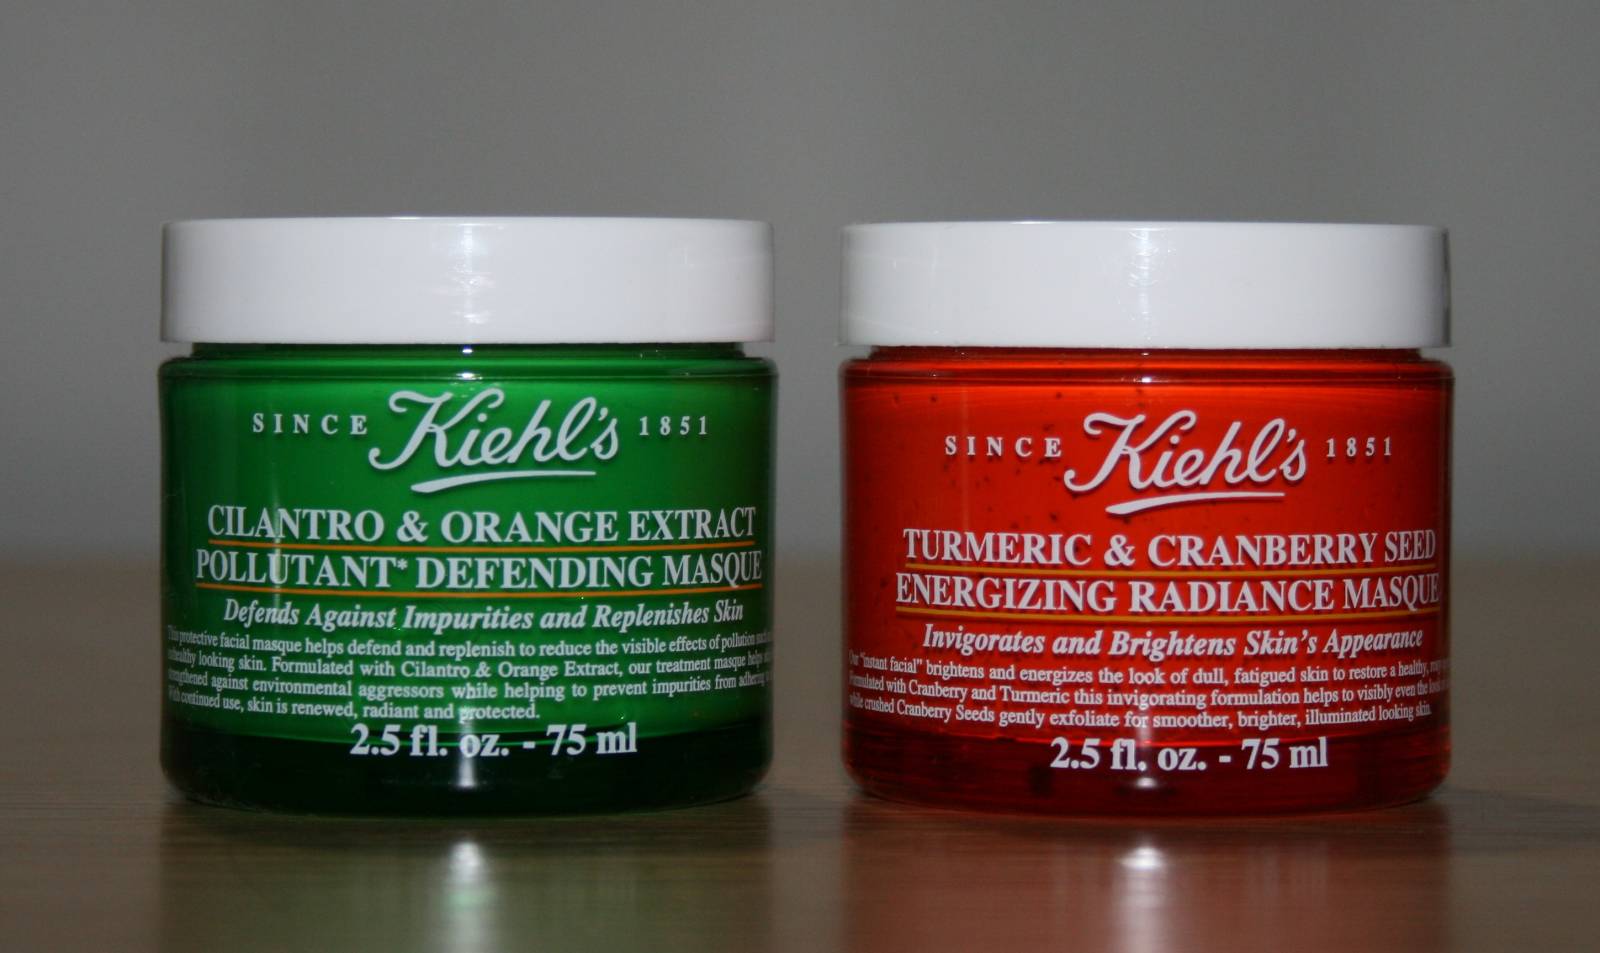 New From Kiehl’s: Turmeric & Cranberry Seed Energizing Radiance Masque and Cilantro & Orange Extract Pollutant Defending Masque